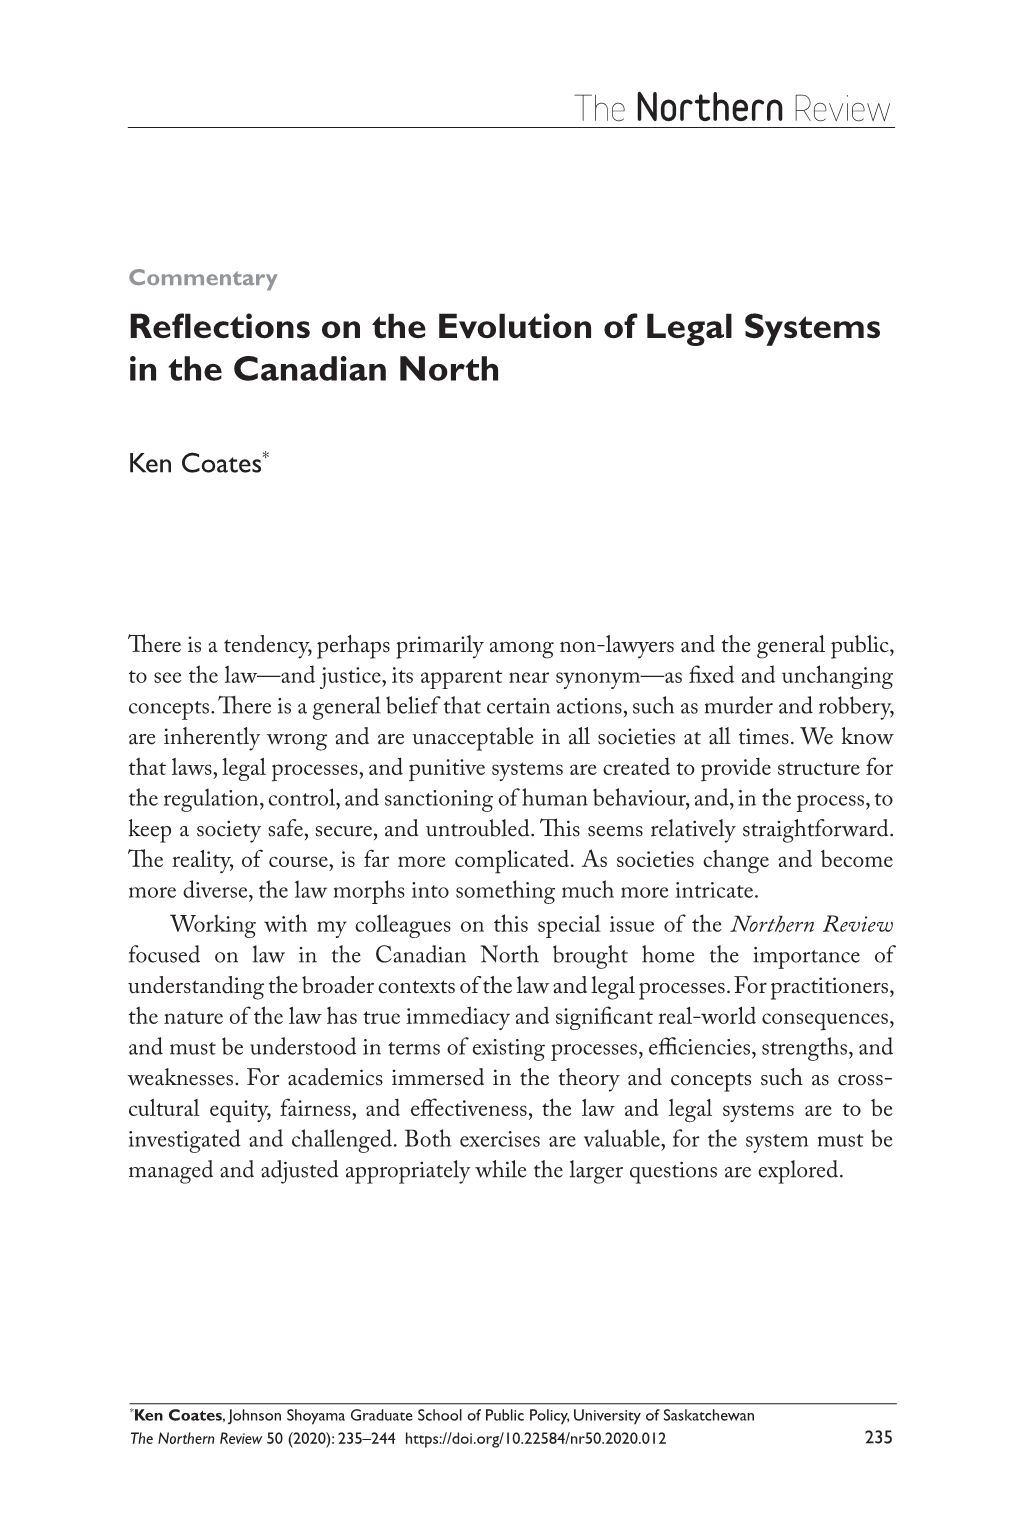 Reflections on the Evolution of Legal Systems in the Canadian North